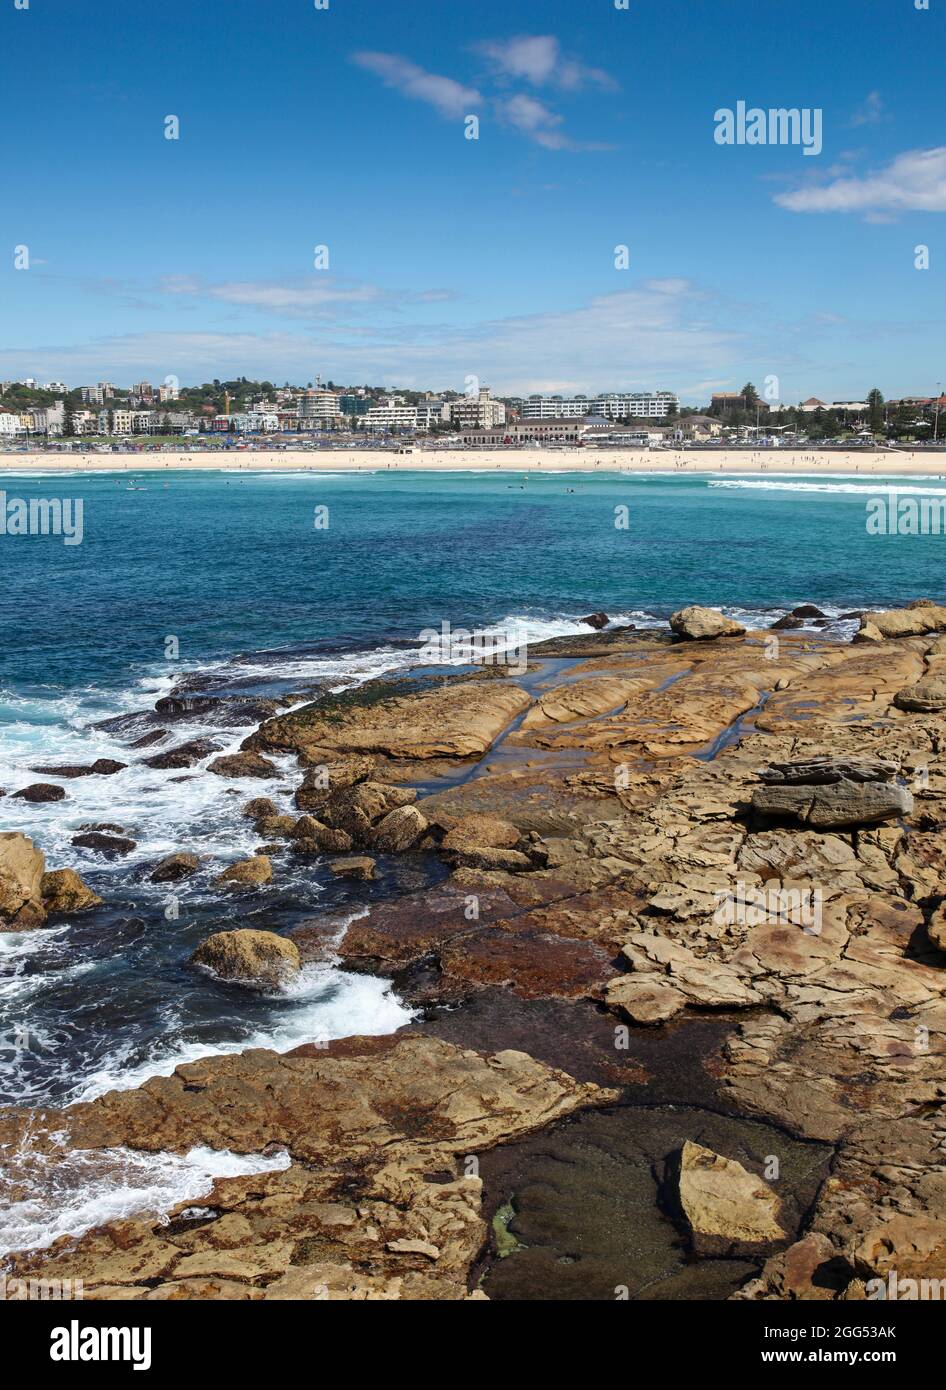 Bondi Beach is perhaps Australia's most famous beach. This images is from the rocks at the northern headland. Bondi Beach - NSW - Australia Stock Photo